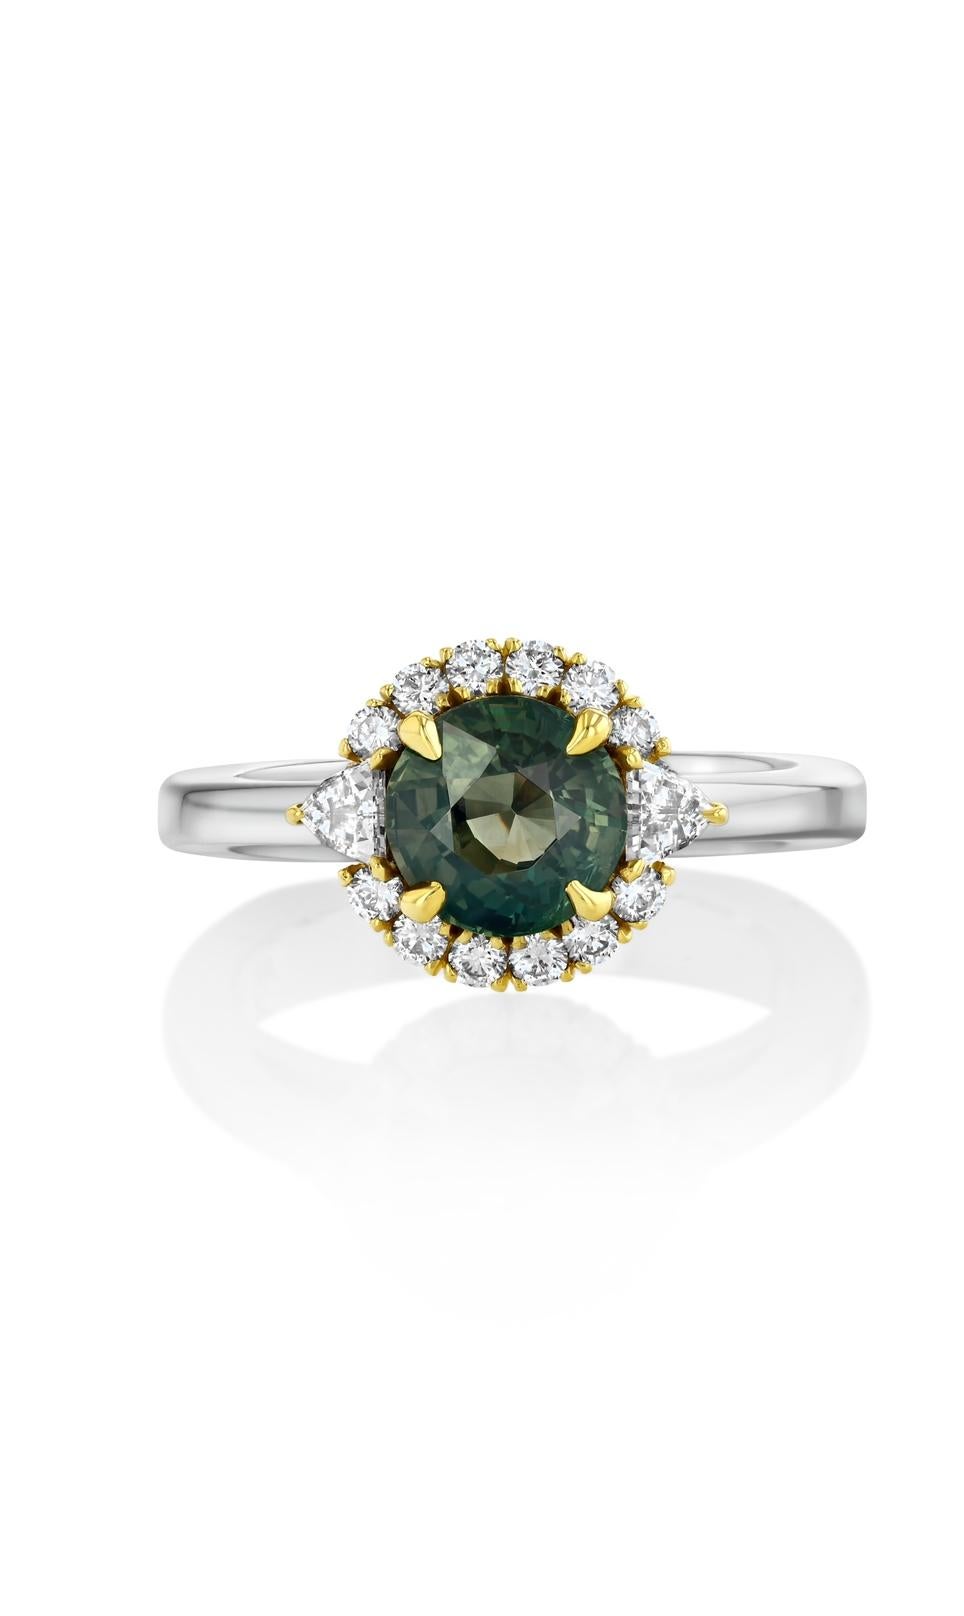 Modern 1.74ct round Alexandrite. Ring in platinum and 18K yellow gold. GIA certified. For Sale